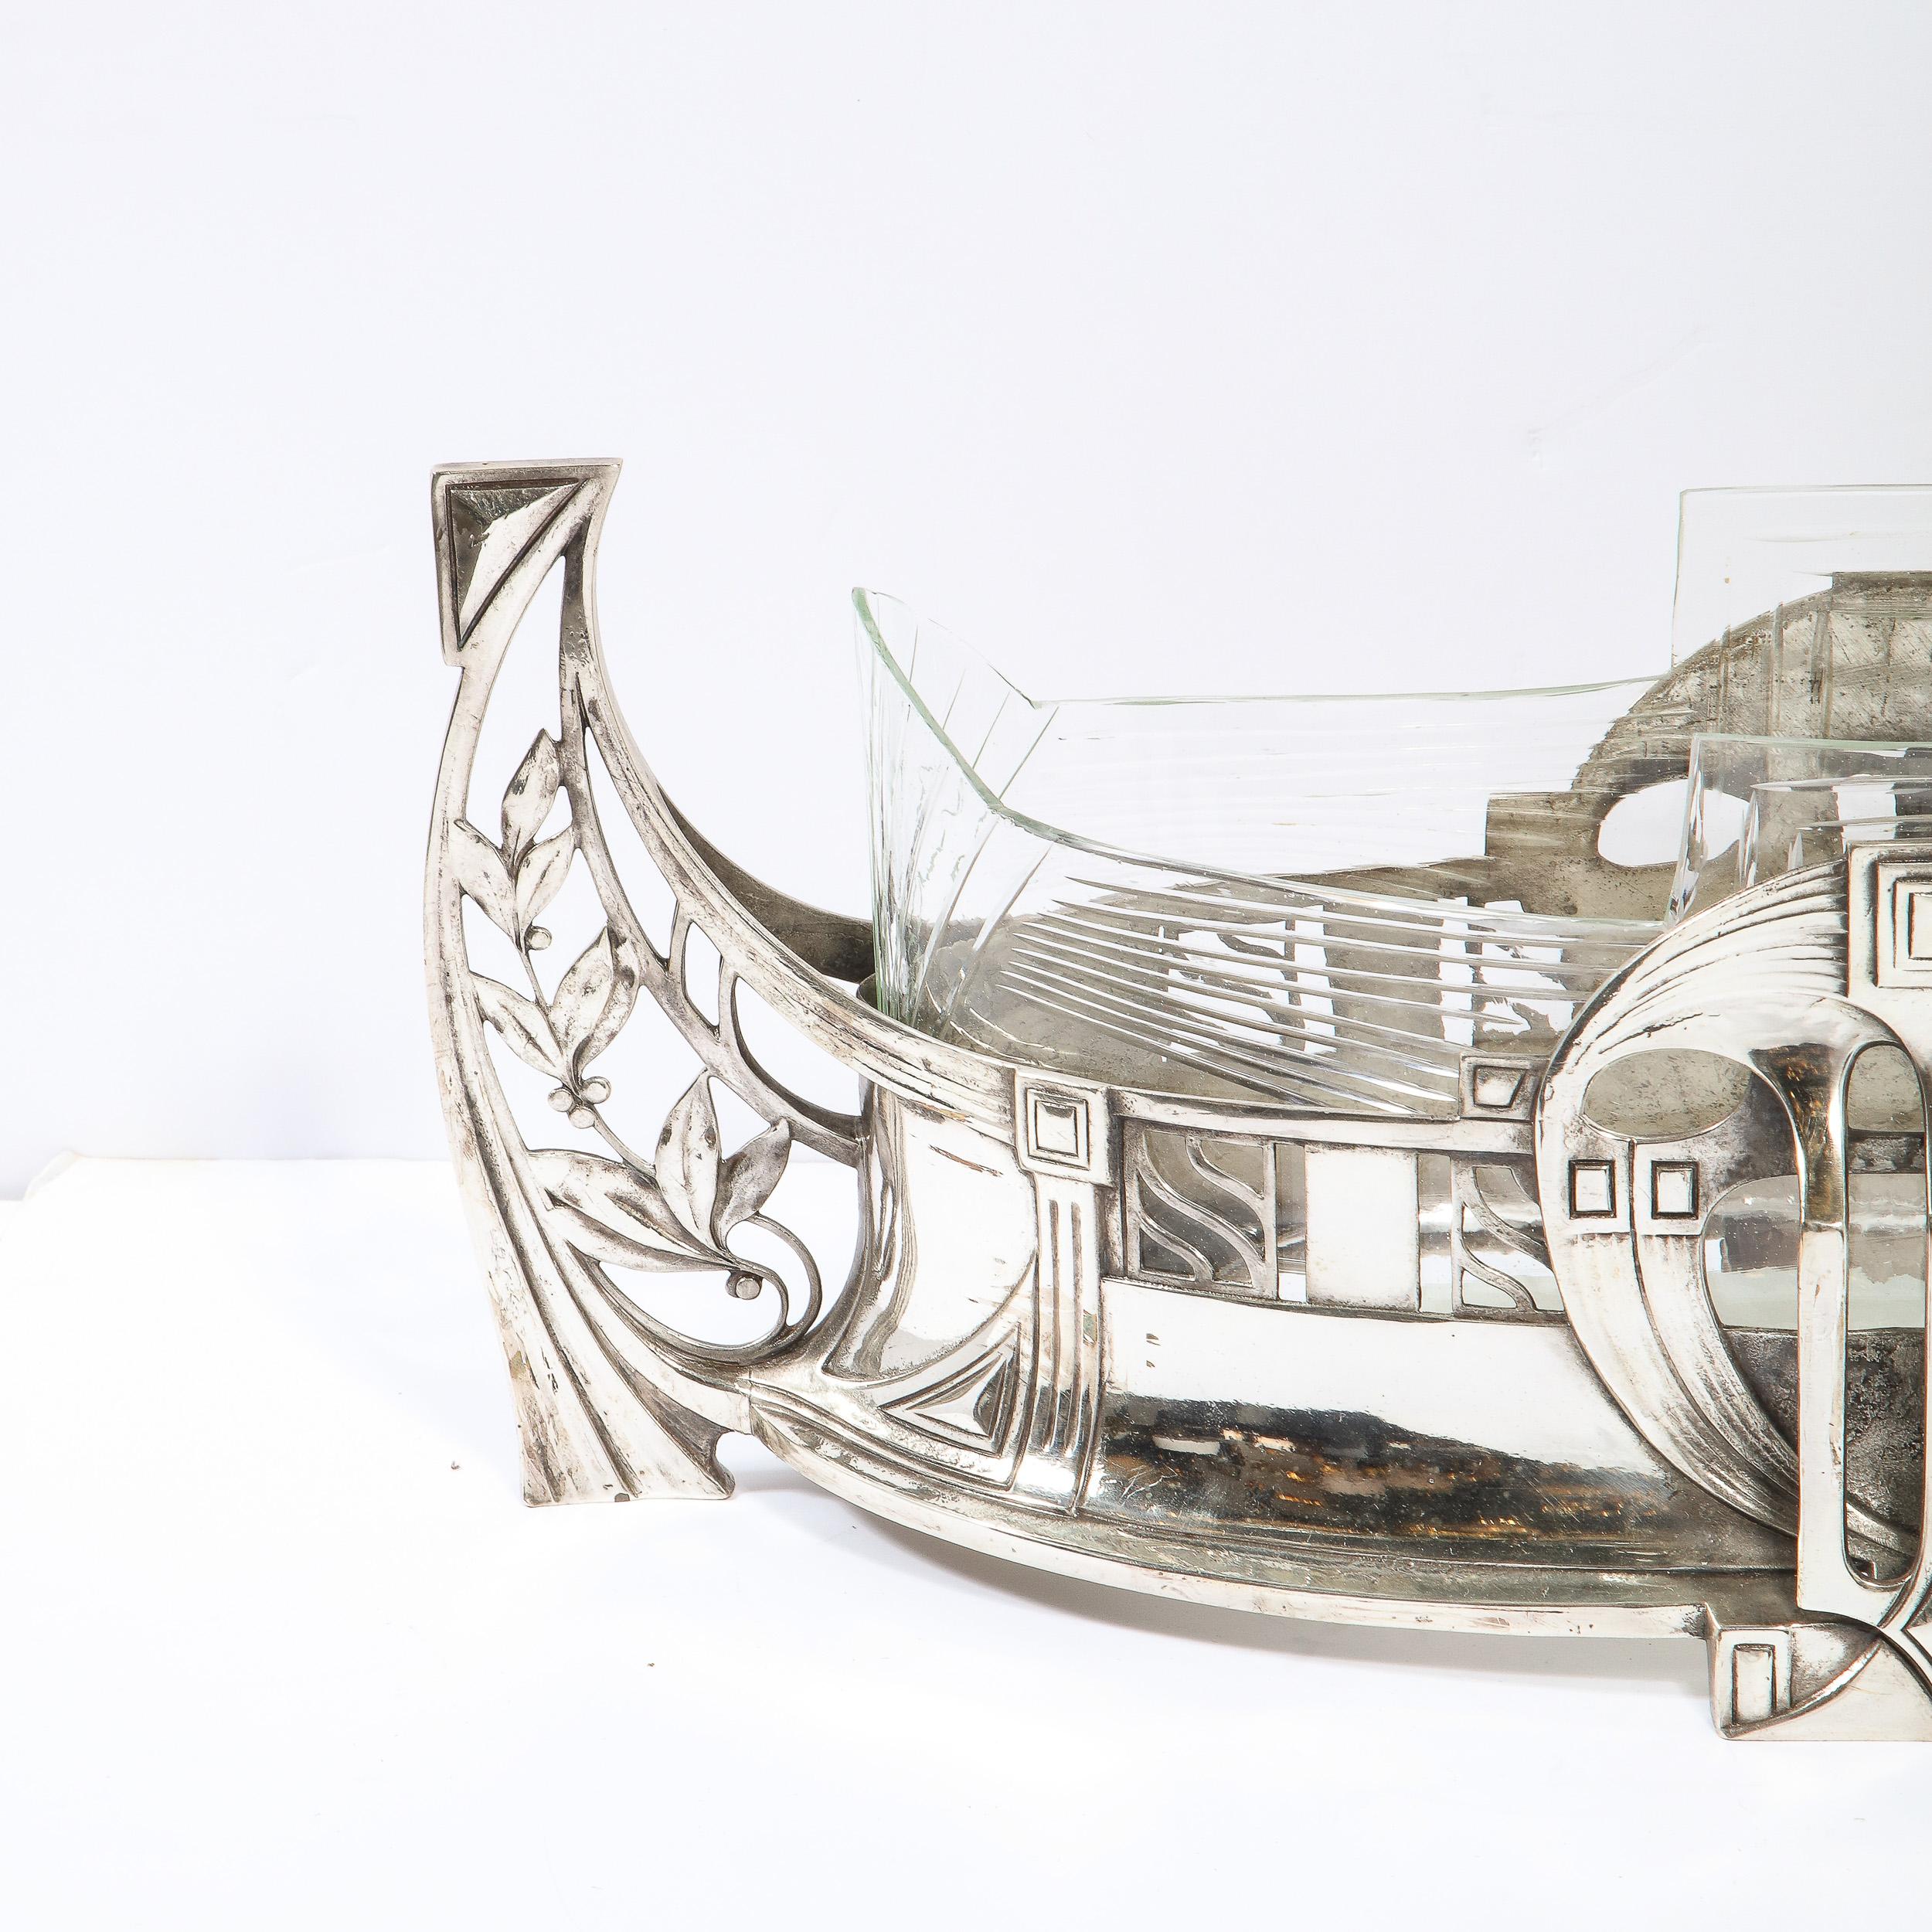 This elegant Art Deco silverplate center piece was realized by the esteemed atelier of WMF Ikora in Germany circa 1925. Resembling a stylized Adrestia, or ancient Greek ship, the piece features streamlined open form sides with foliate detailing;